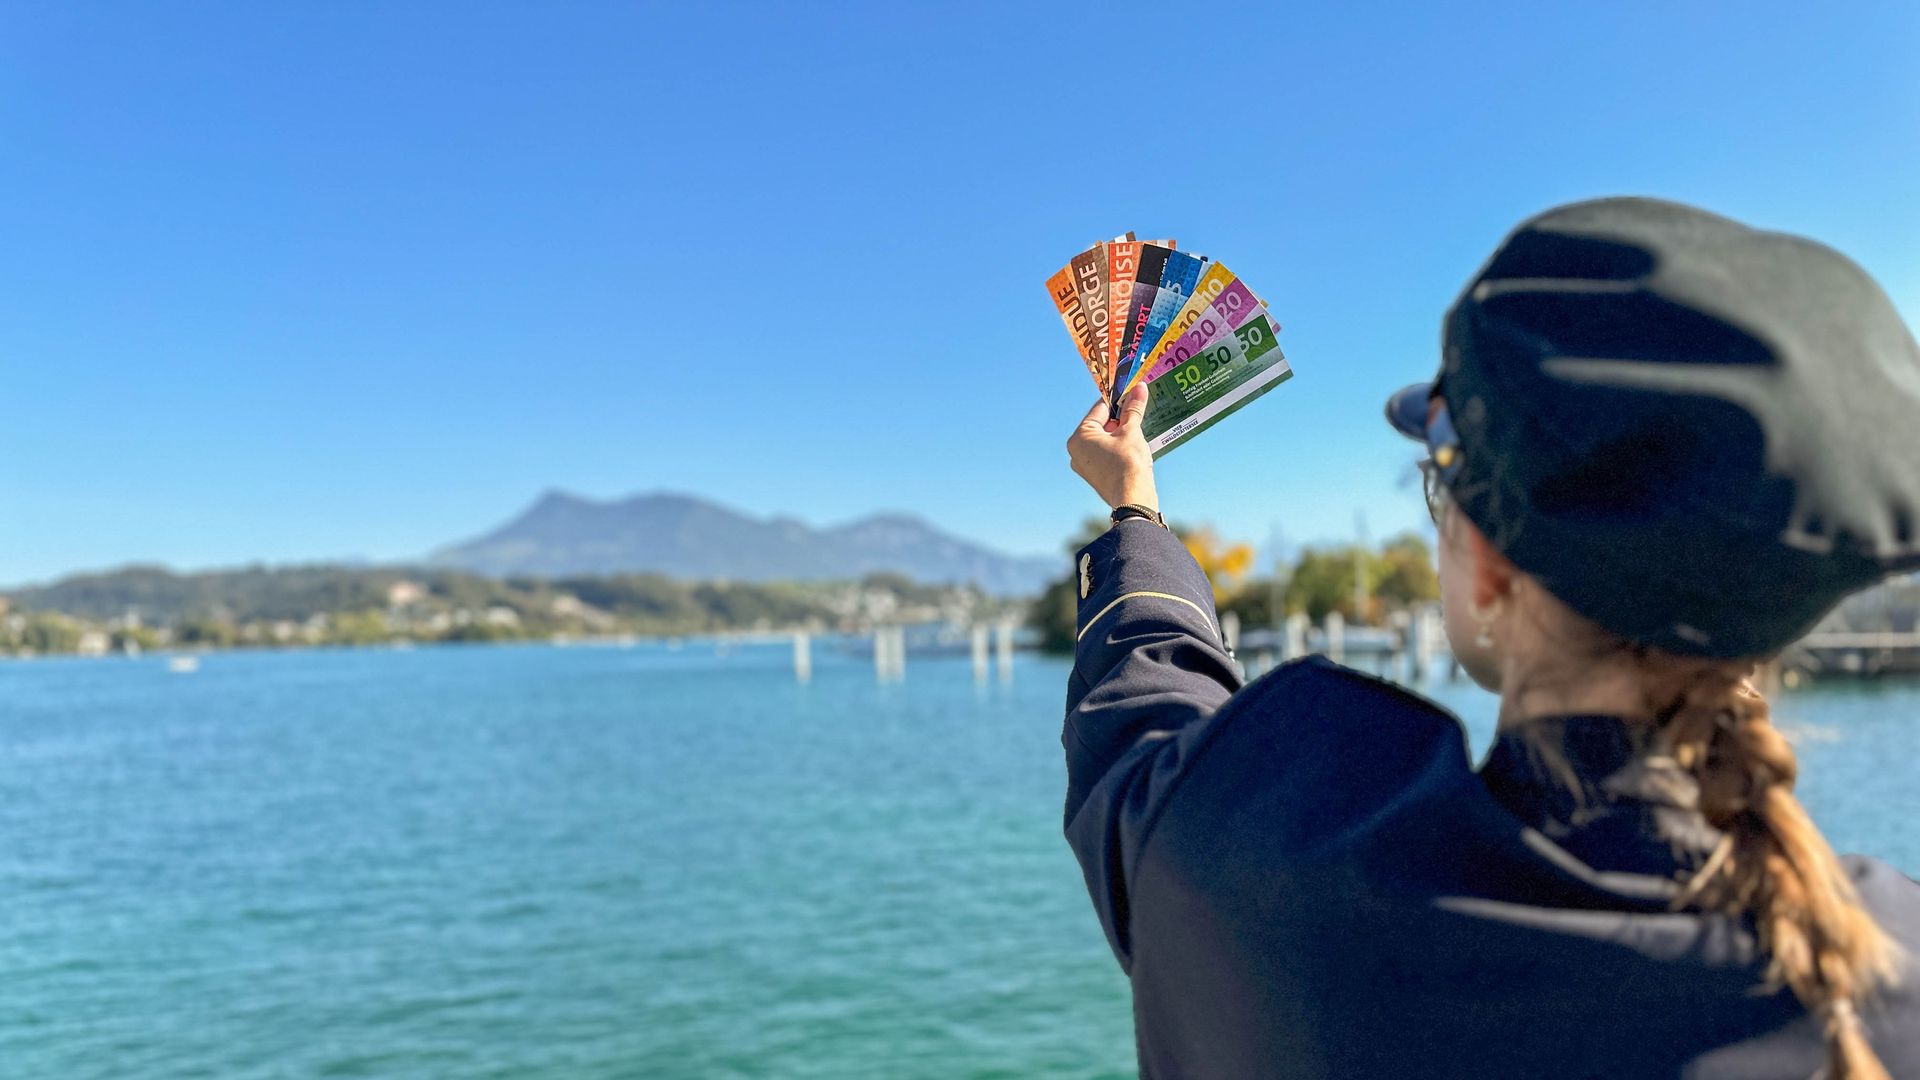 Picture with a person lifting the vouchers into the sky and in the background you can see Lake Lucerne and the mountains.